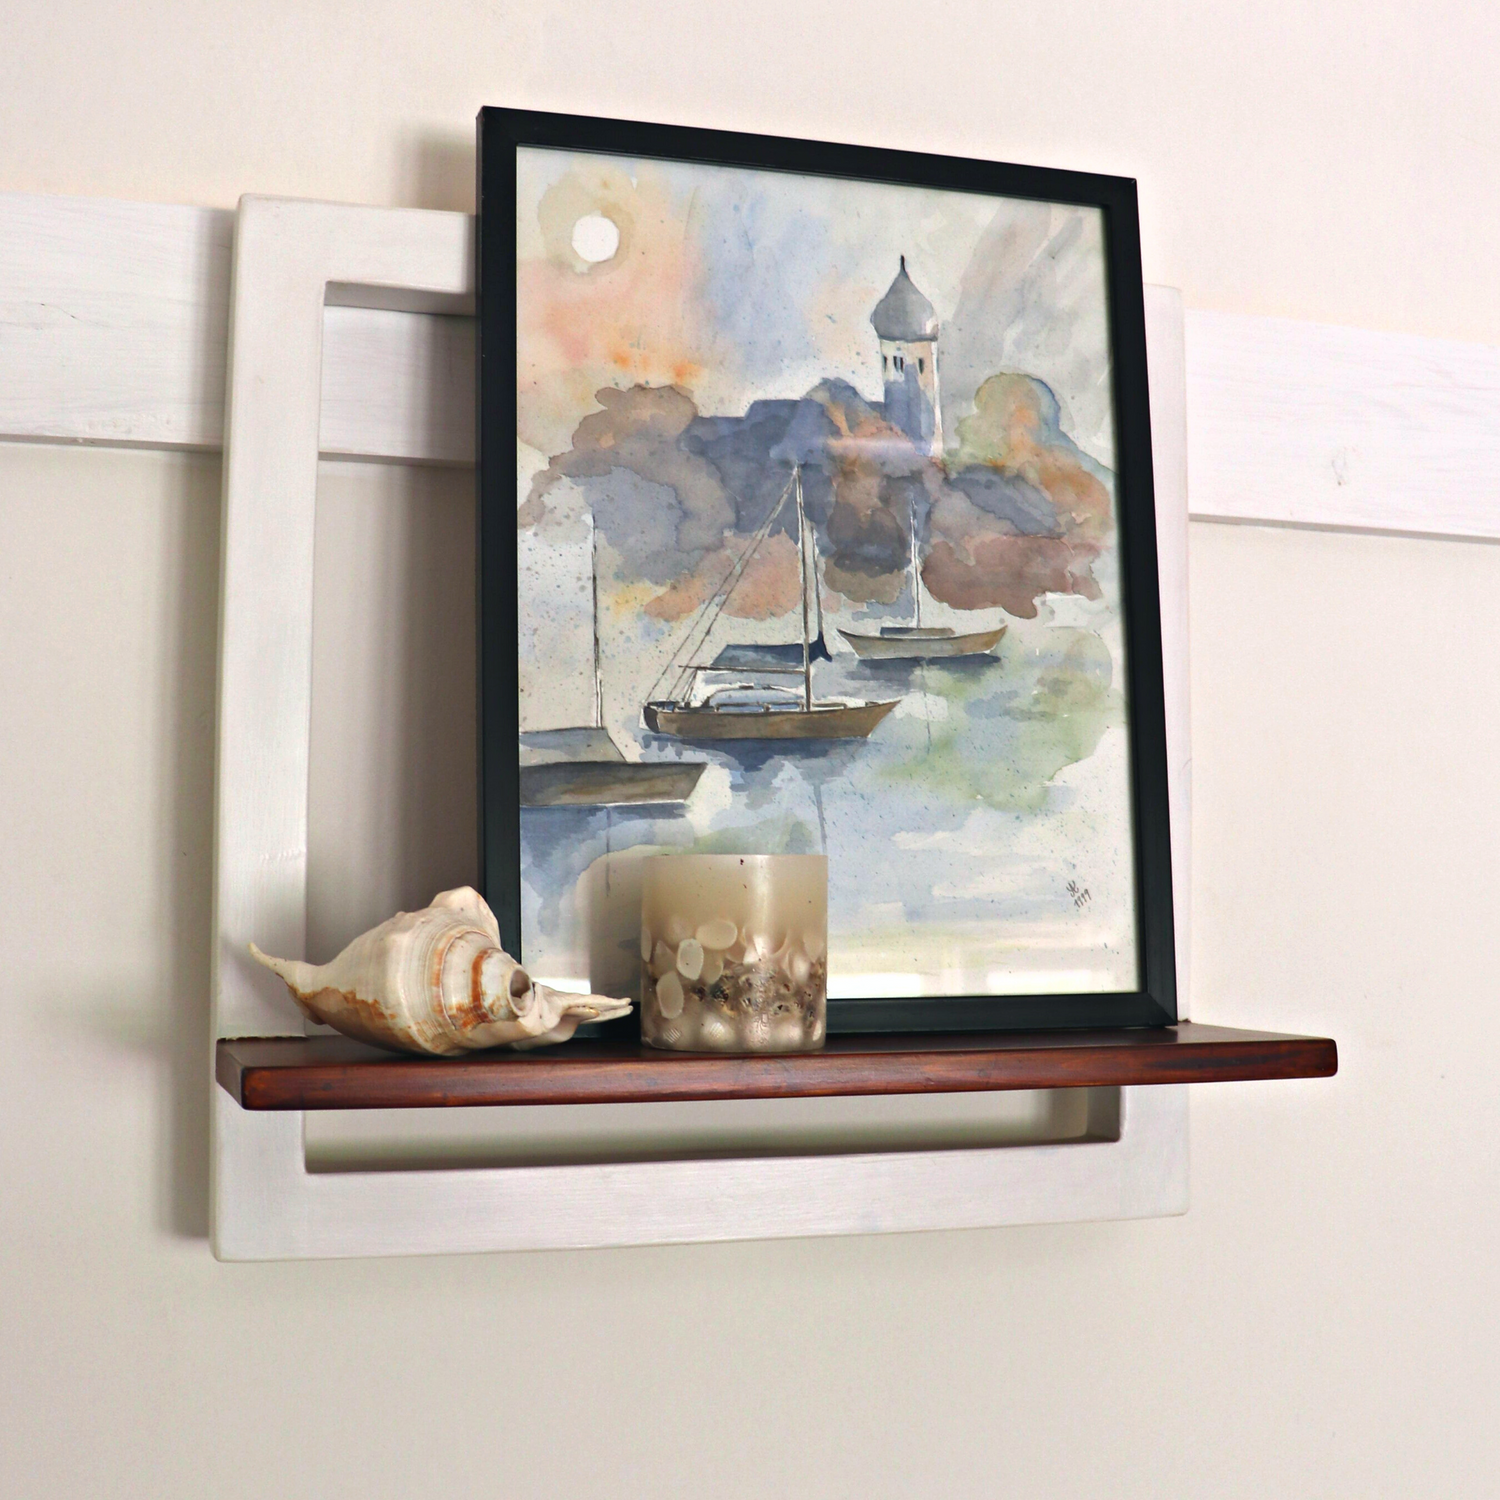 CustHum - Picture frame-type shelf with decorative items placed on it